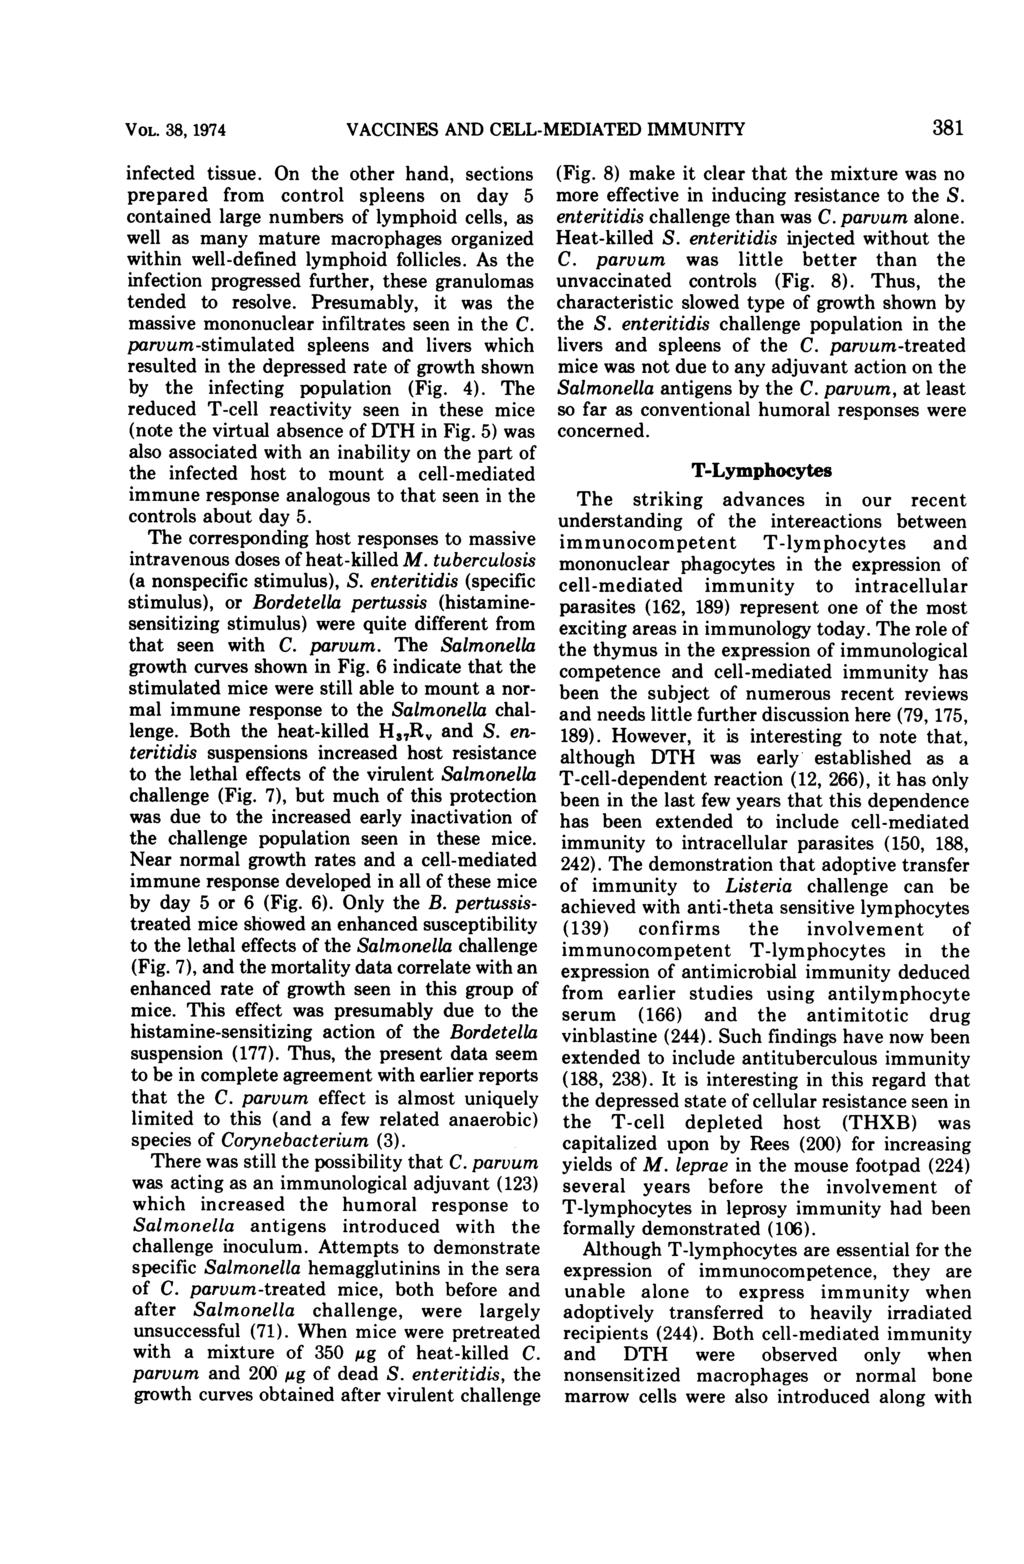 VOL. 38, 1974 infected tissue.